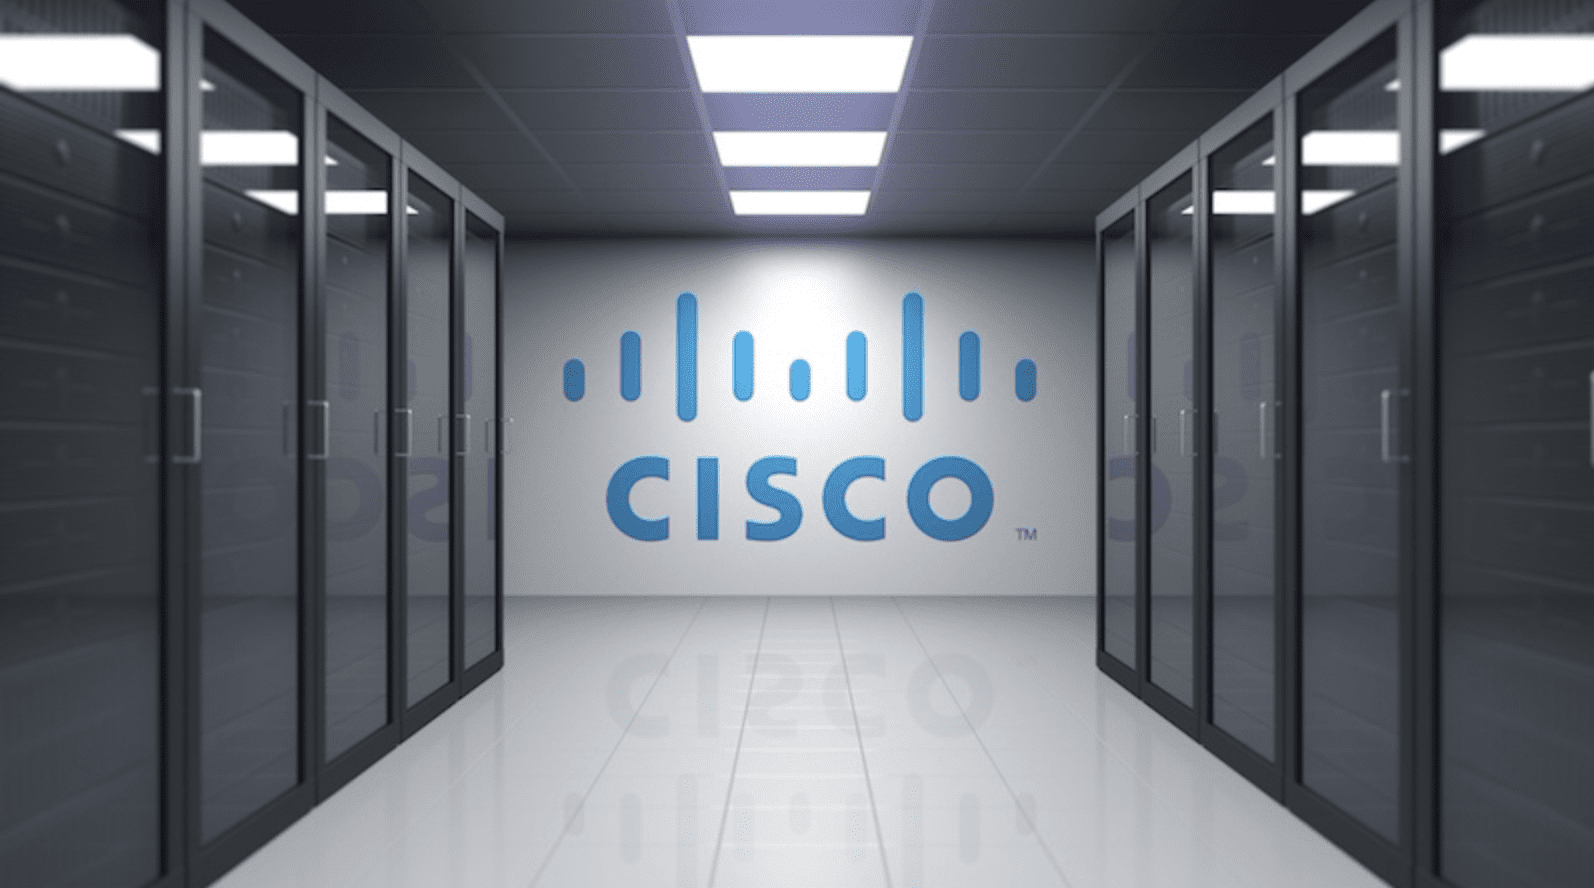 Follow These Tips To Pass Your Cisco 200-901 DEVASC Certification Exam With Ease